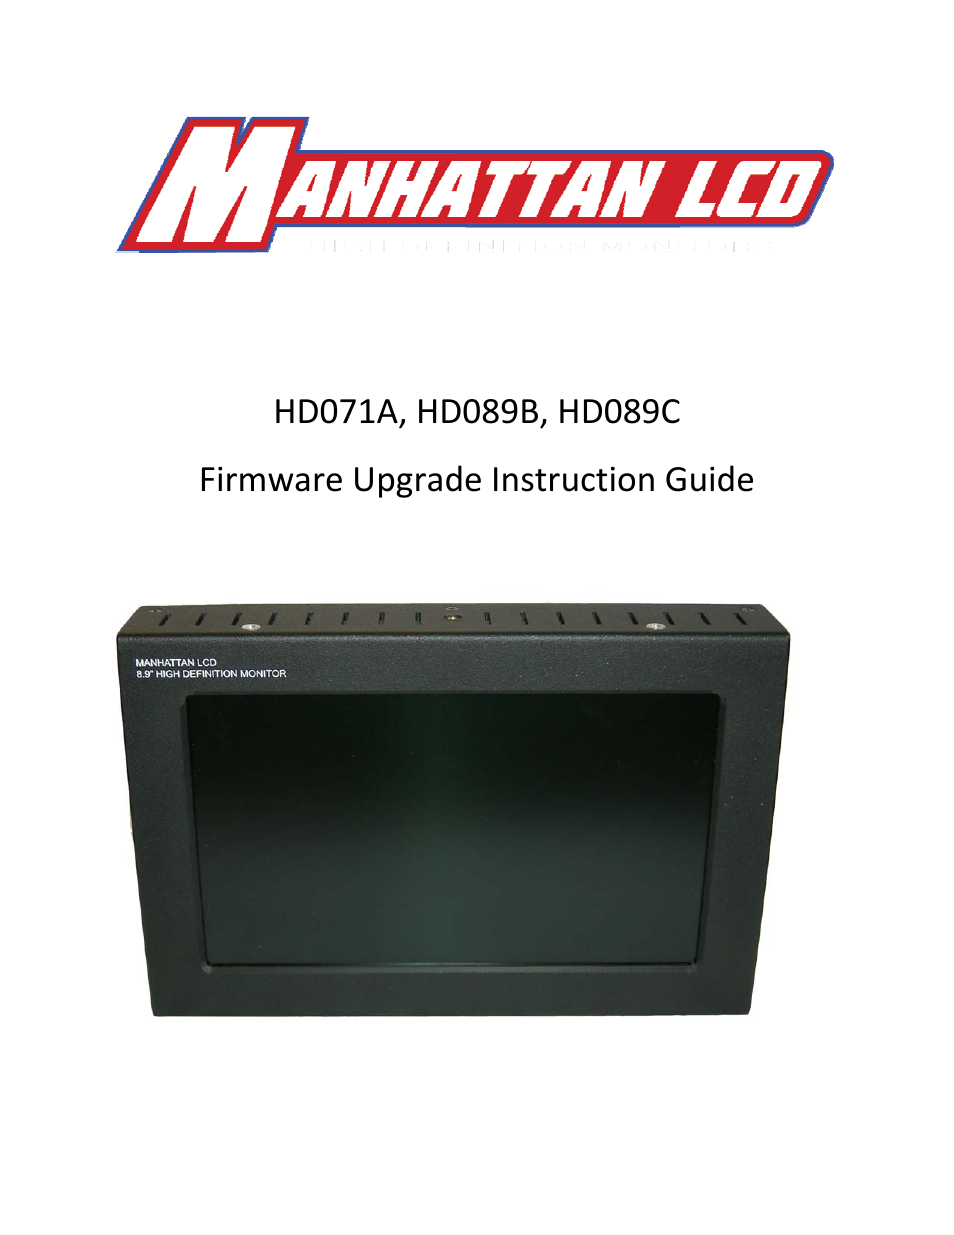 HD089C Firmware Upgrade Instructions